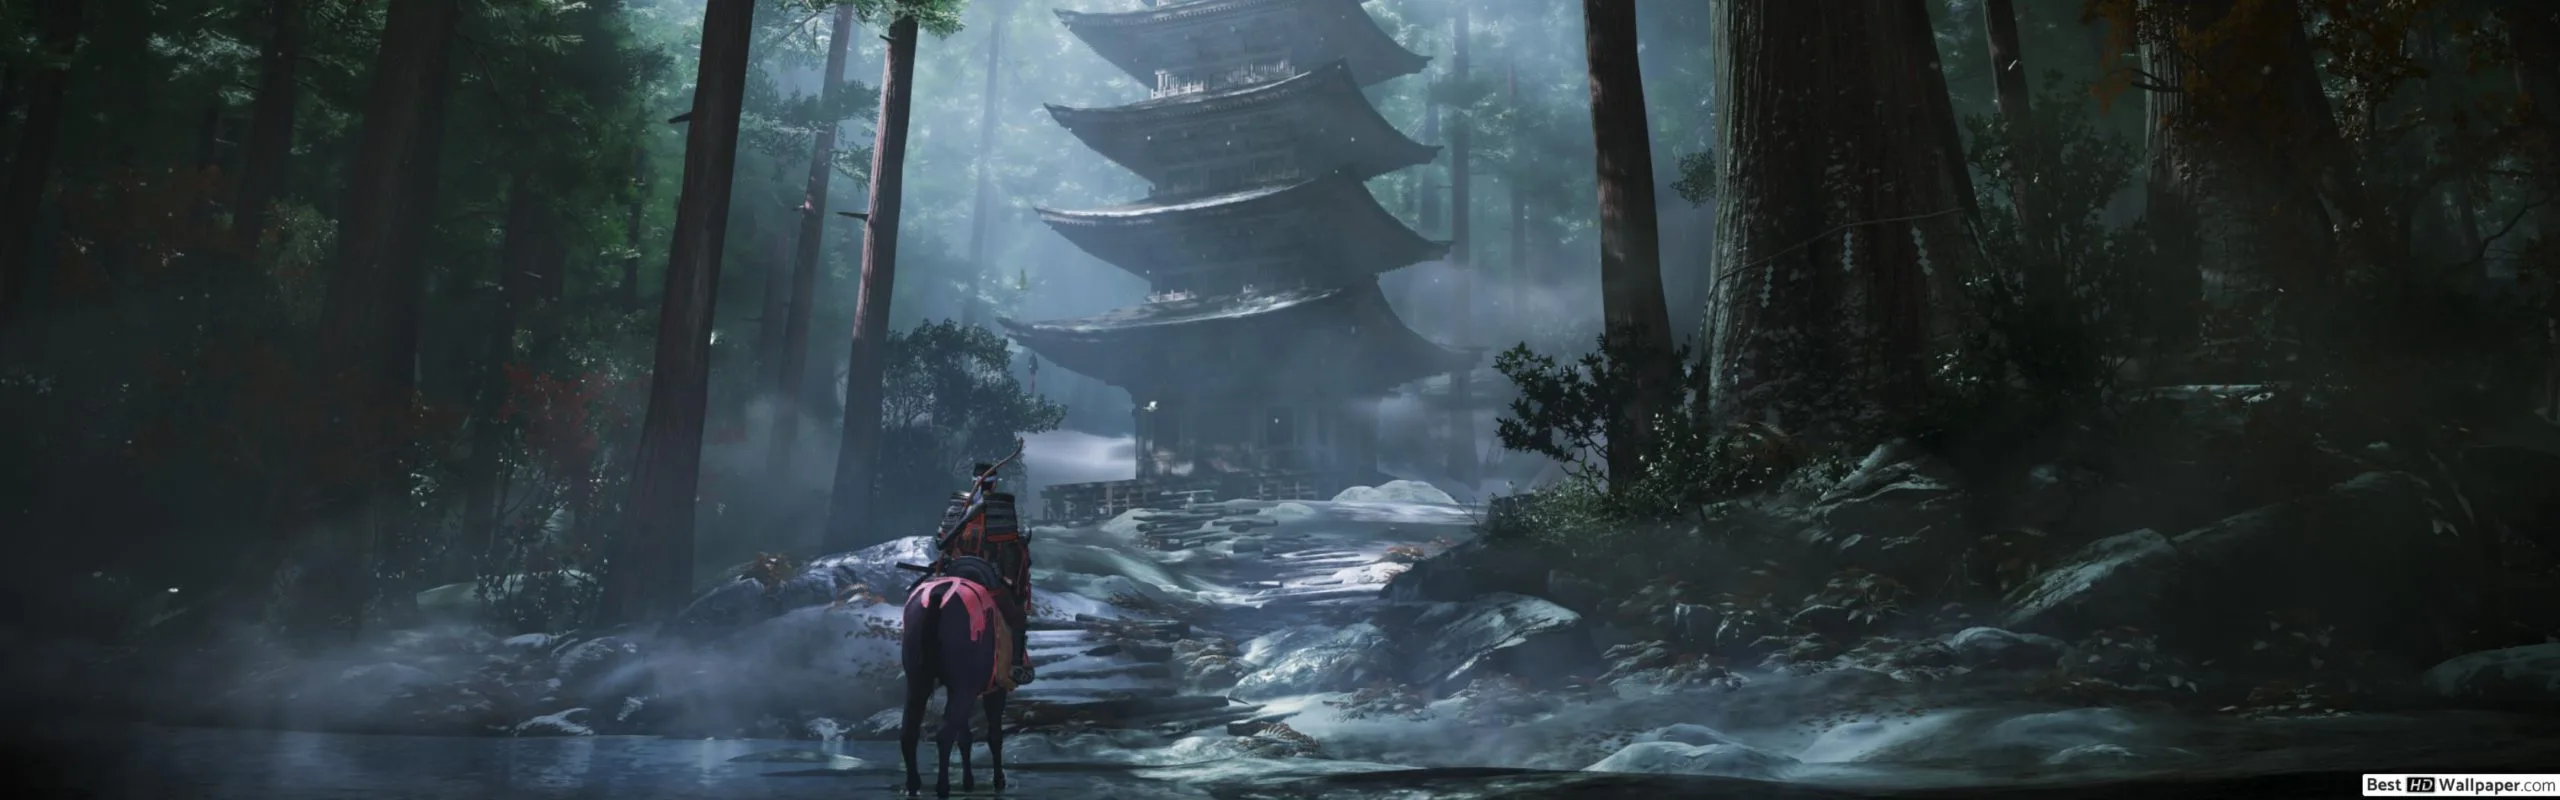 Ghost of Tsushima Remains on the Top of the US Charts